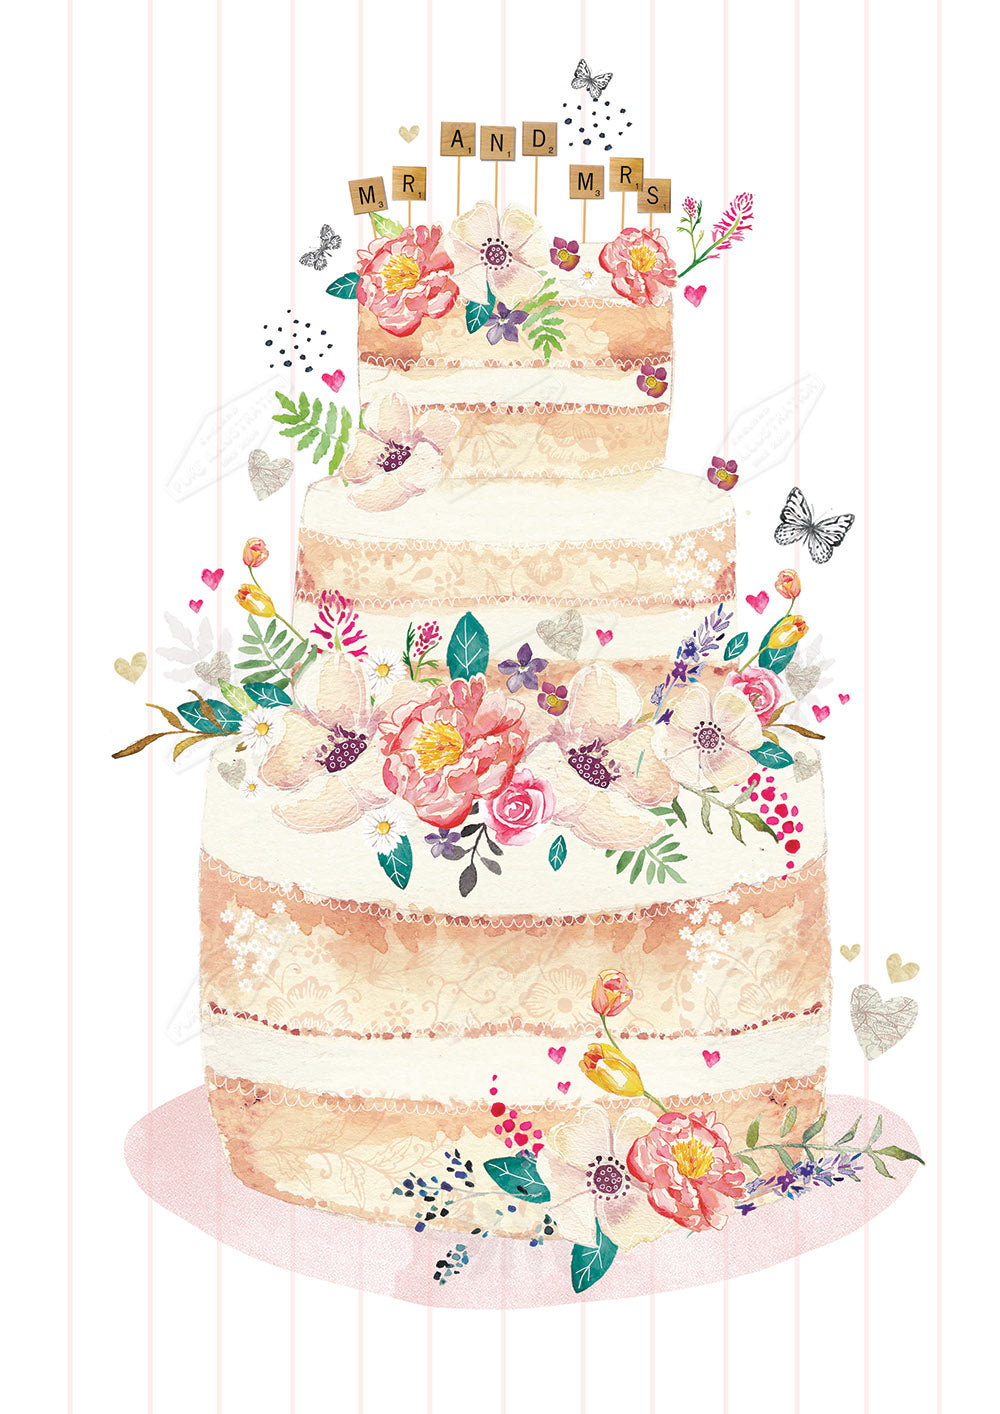 00028108EST- Emily Stalley is represented by Pure Art Licensing Agency - Wedding Greeting Card Design